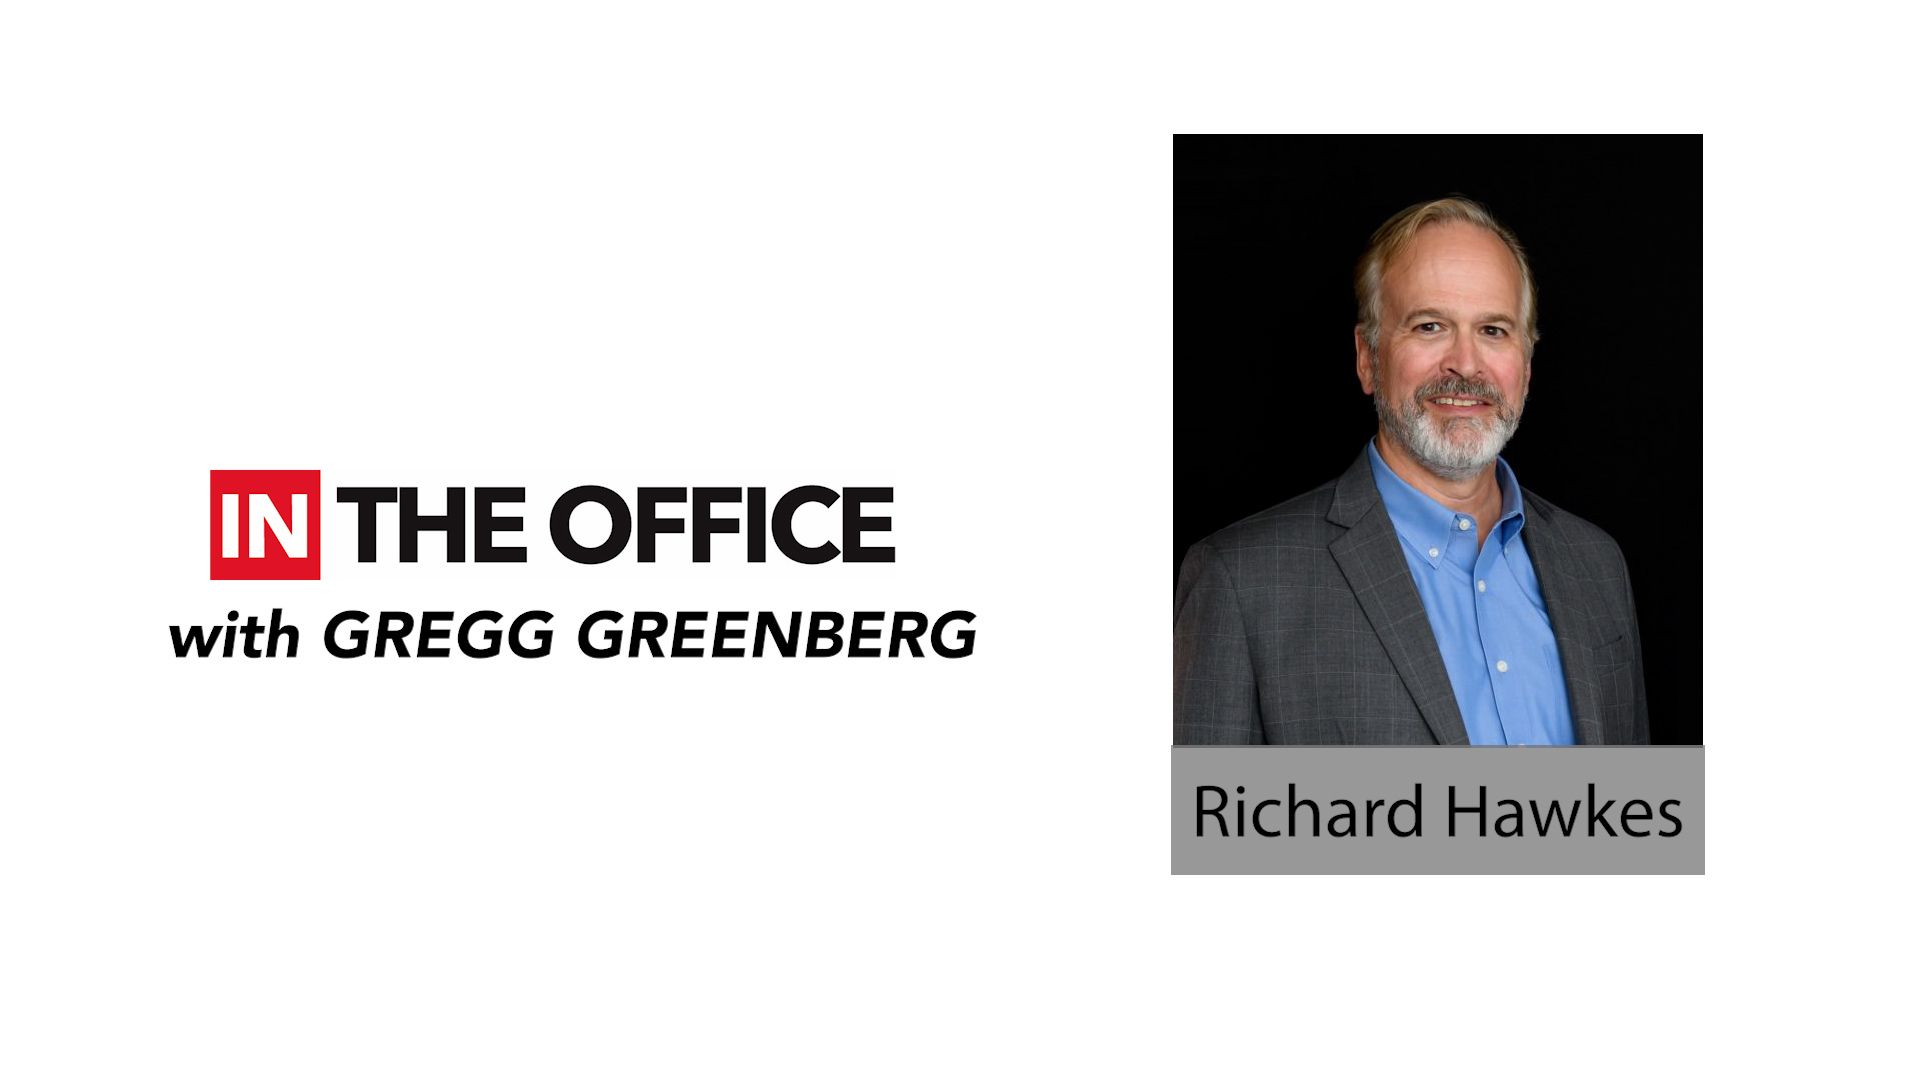 ‘IN the Office’ with organizational expert Richard Hawkes